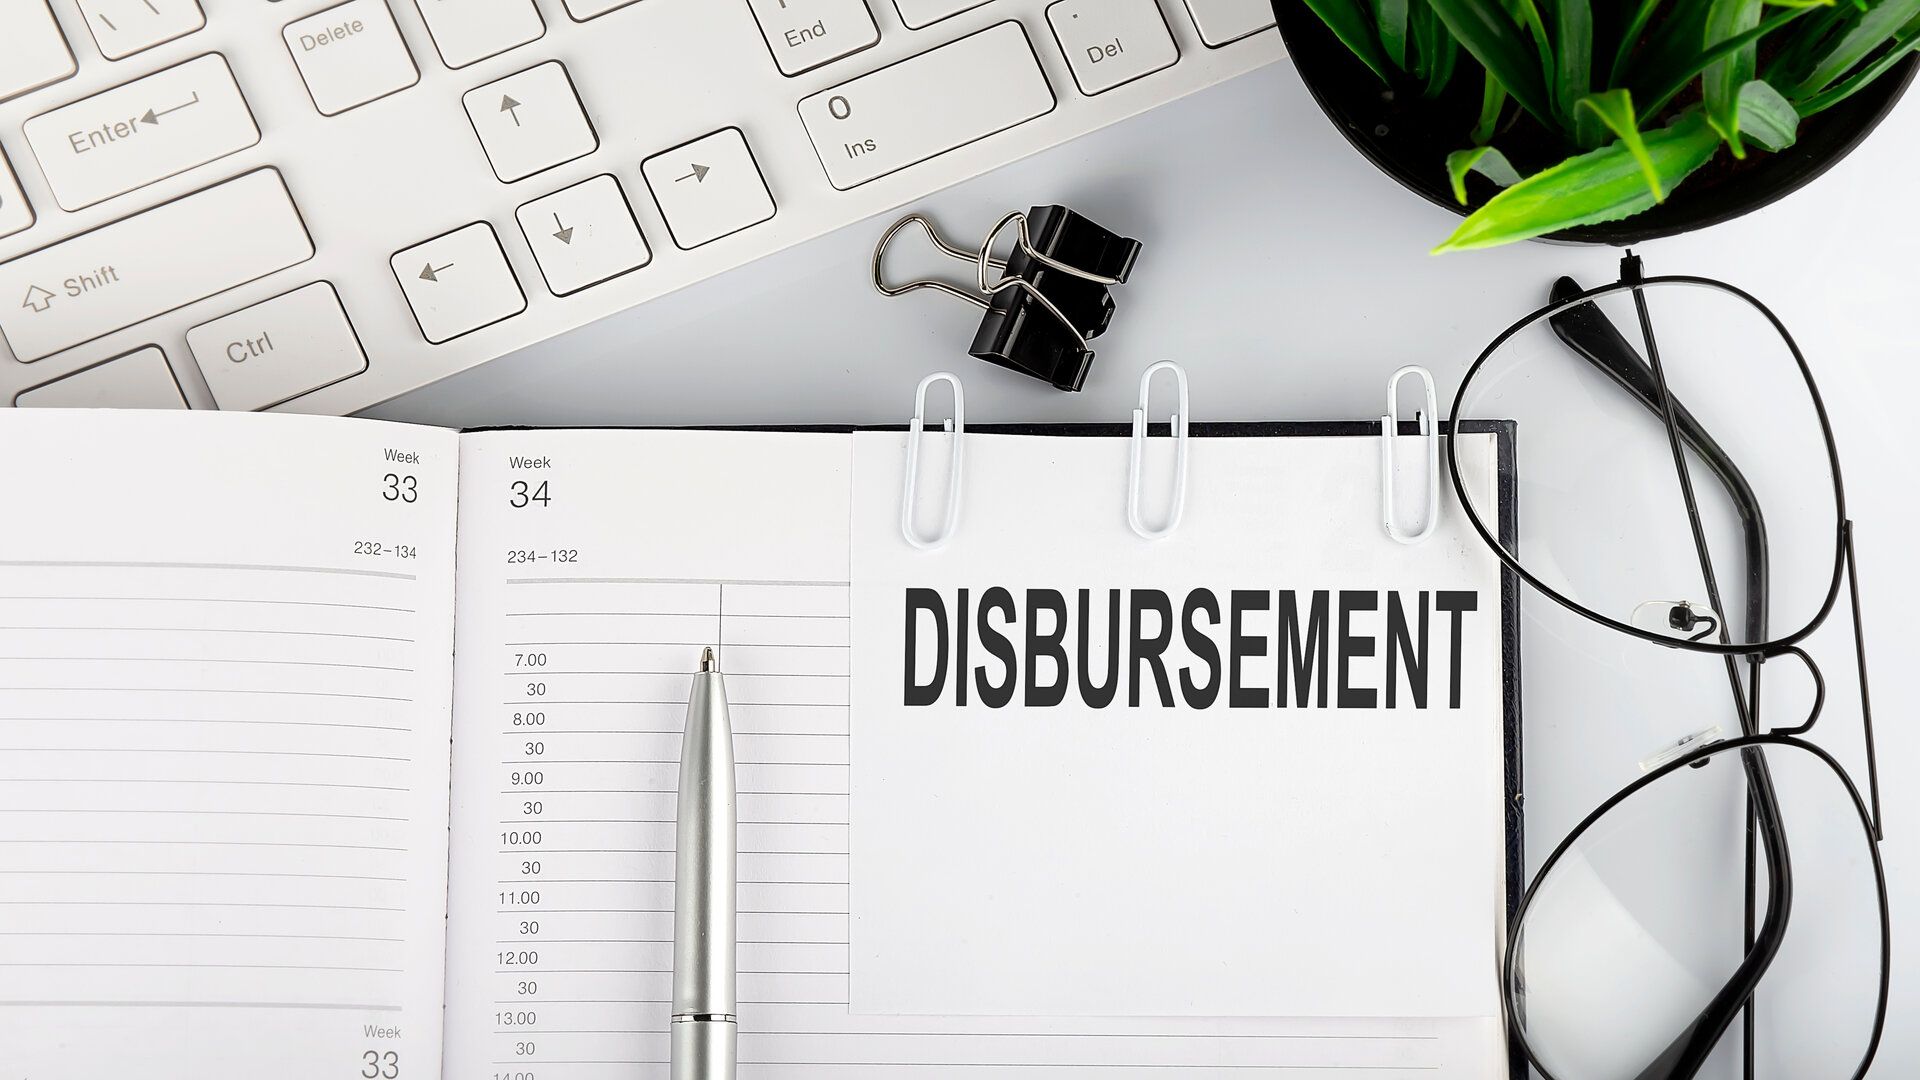 What is Disbursement? – How it works, Types & Examples